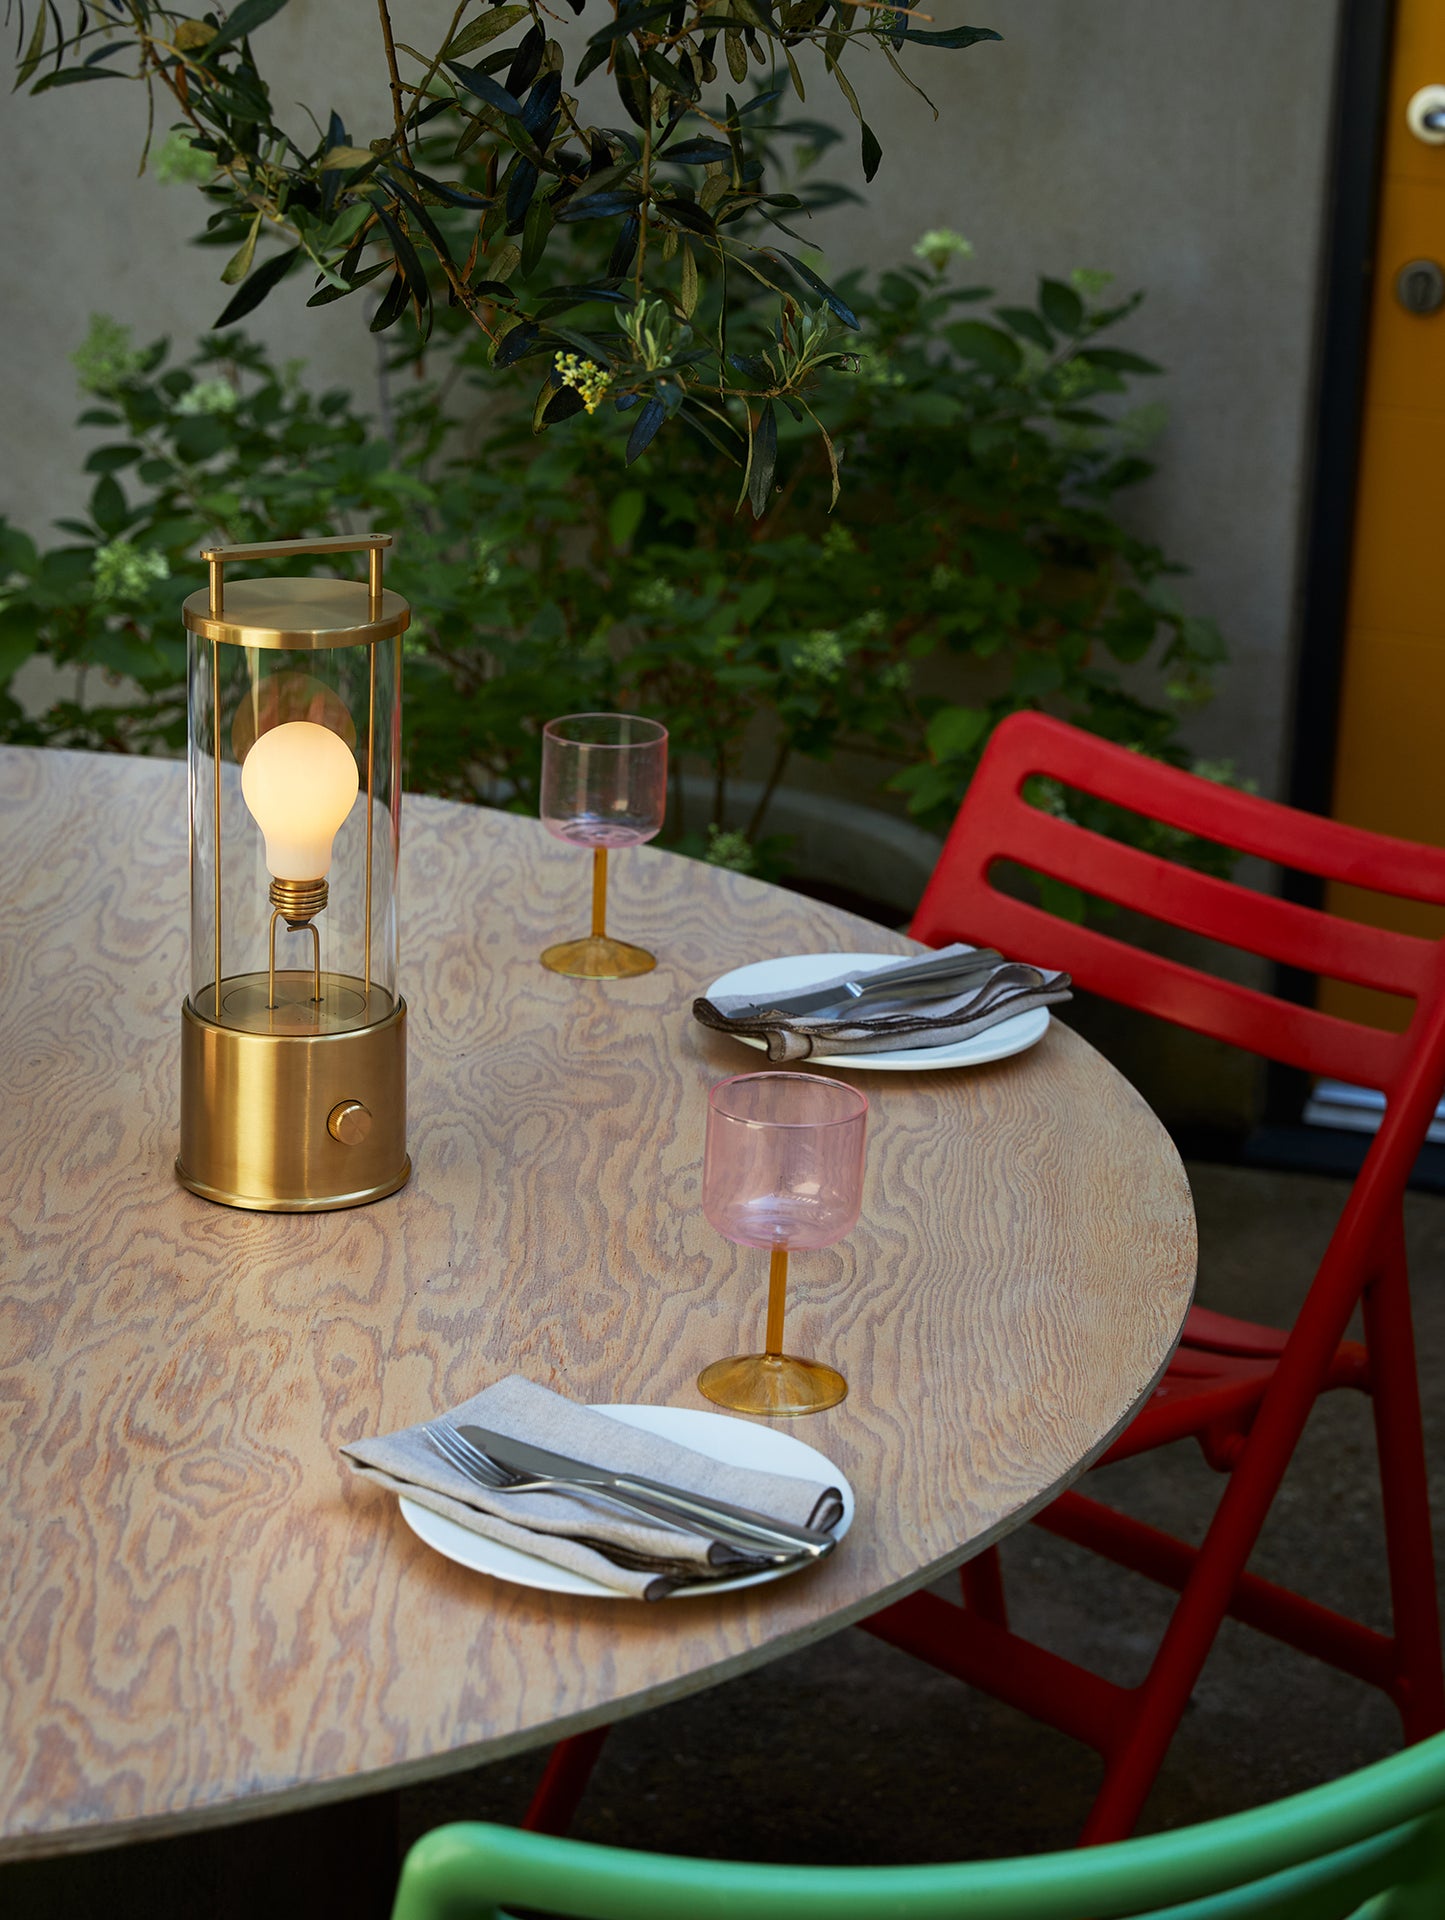 The Muse Portable Lamp (Solid Brass Edition) by Tala